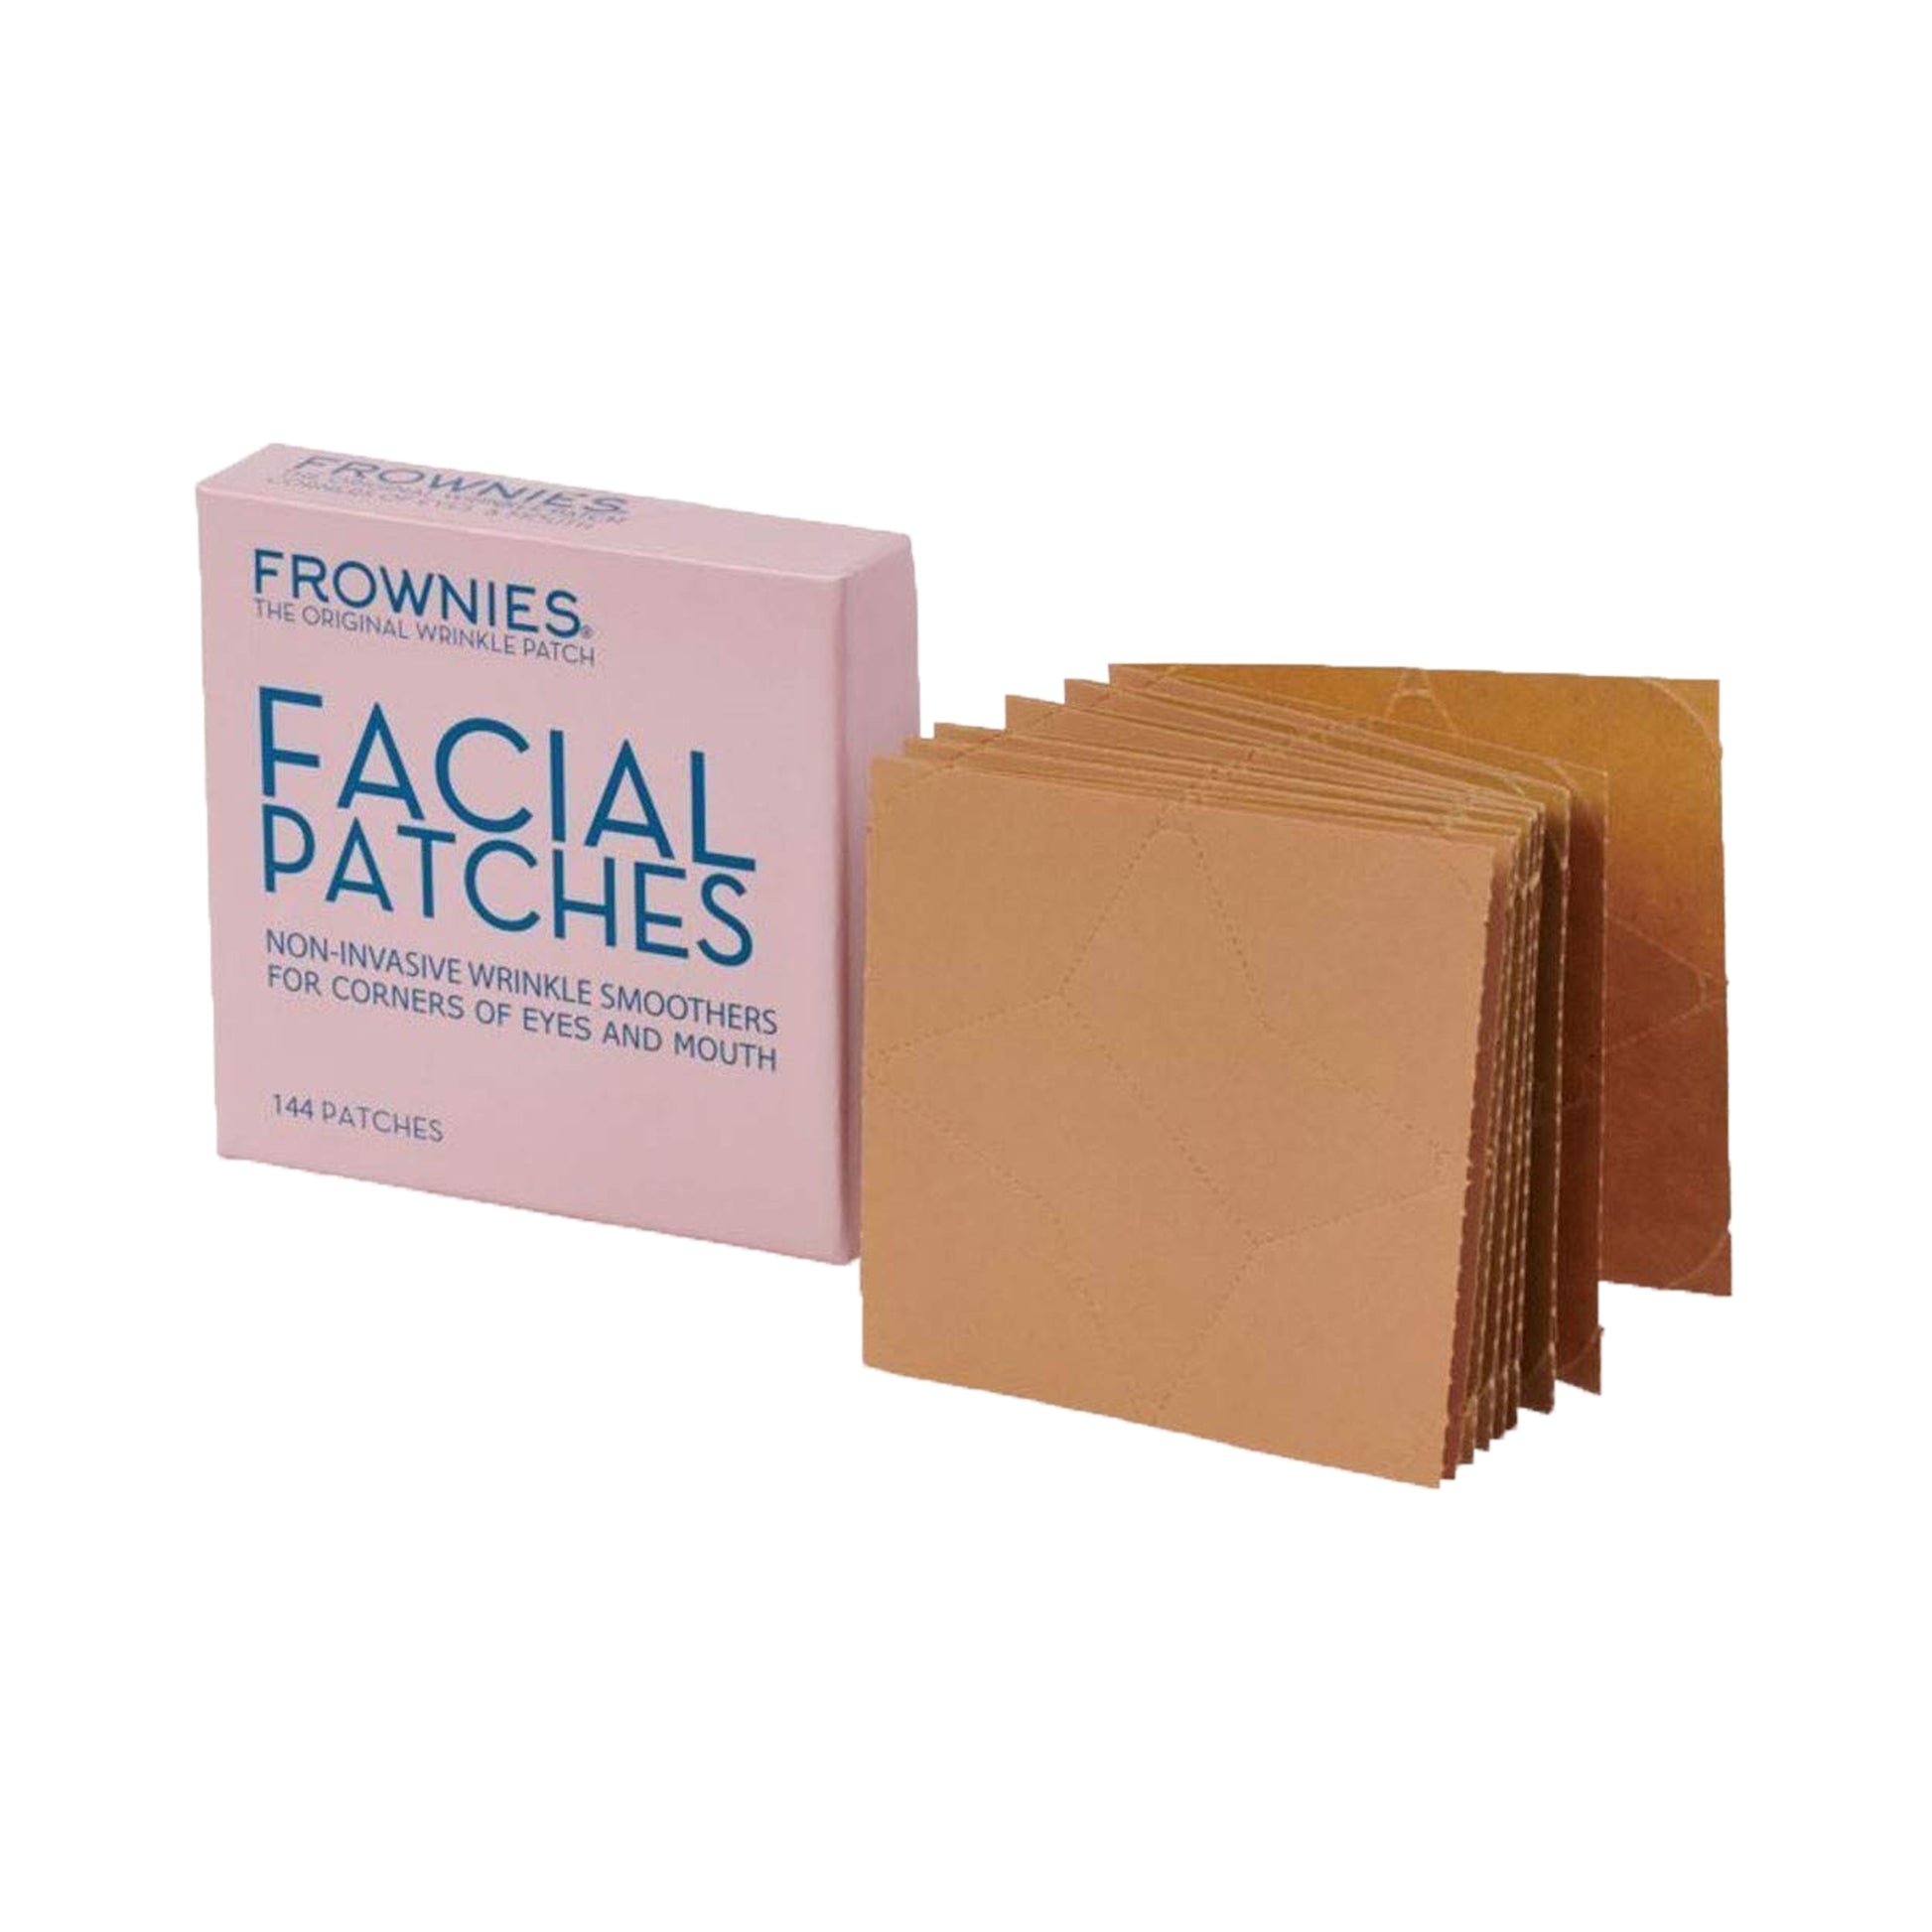 Frownies 144 Facial Patches for Wrinkles on the Corner of Eyes & Mouth CEM